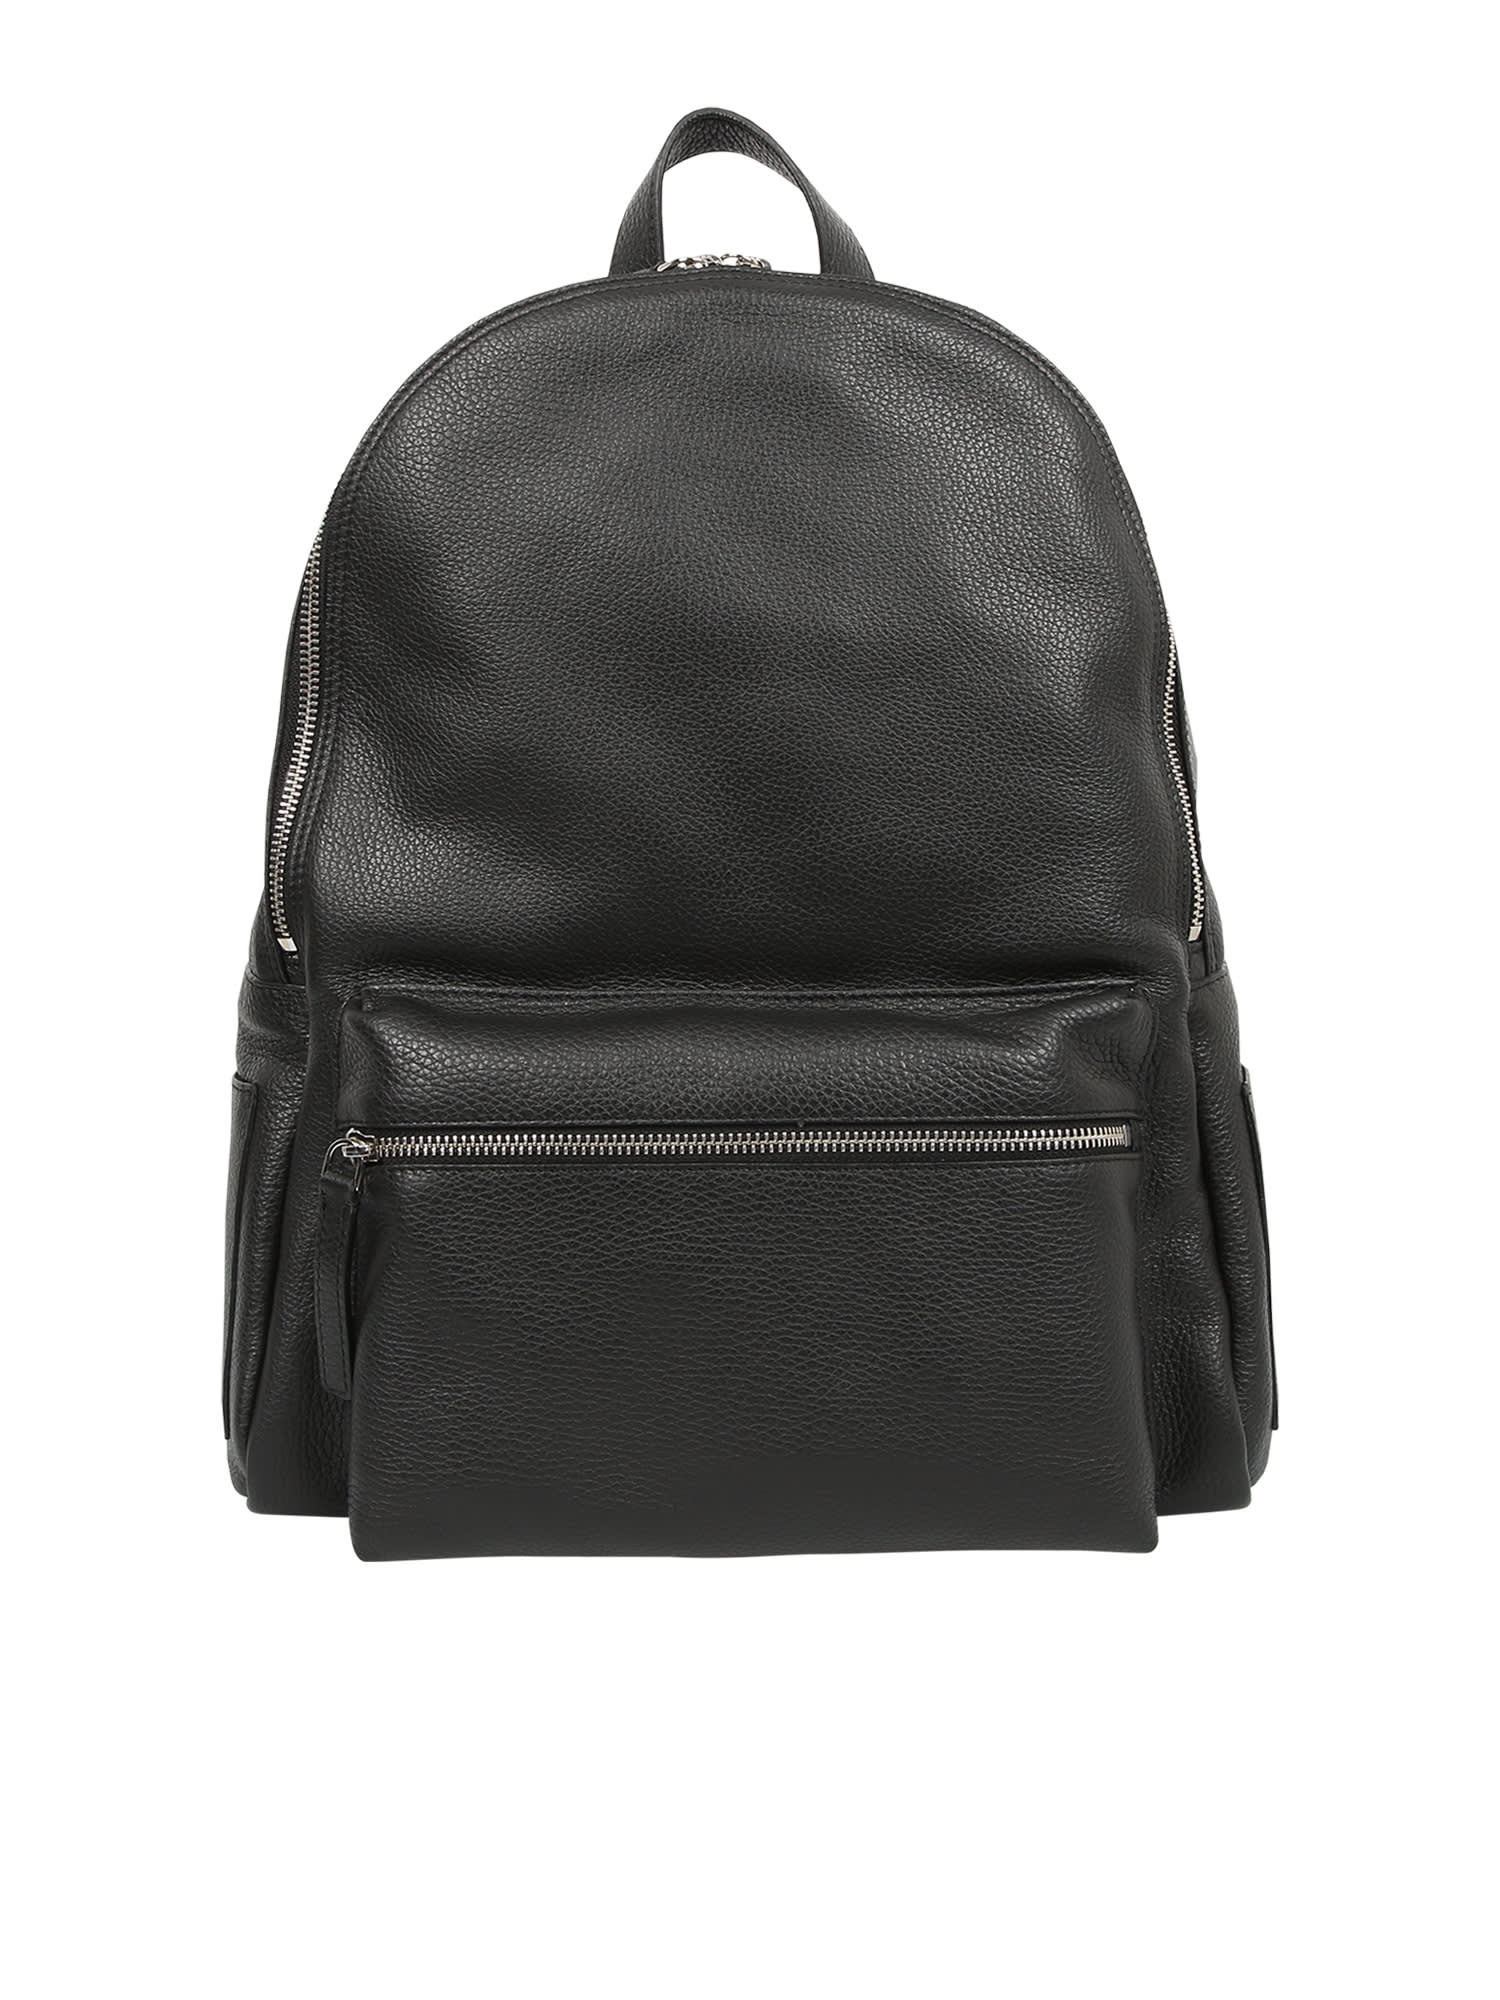 Orciani Grained Leather Backpack